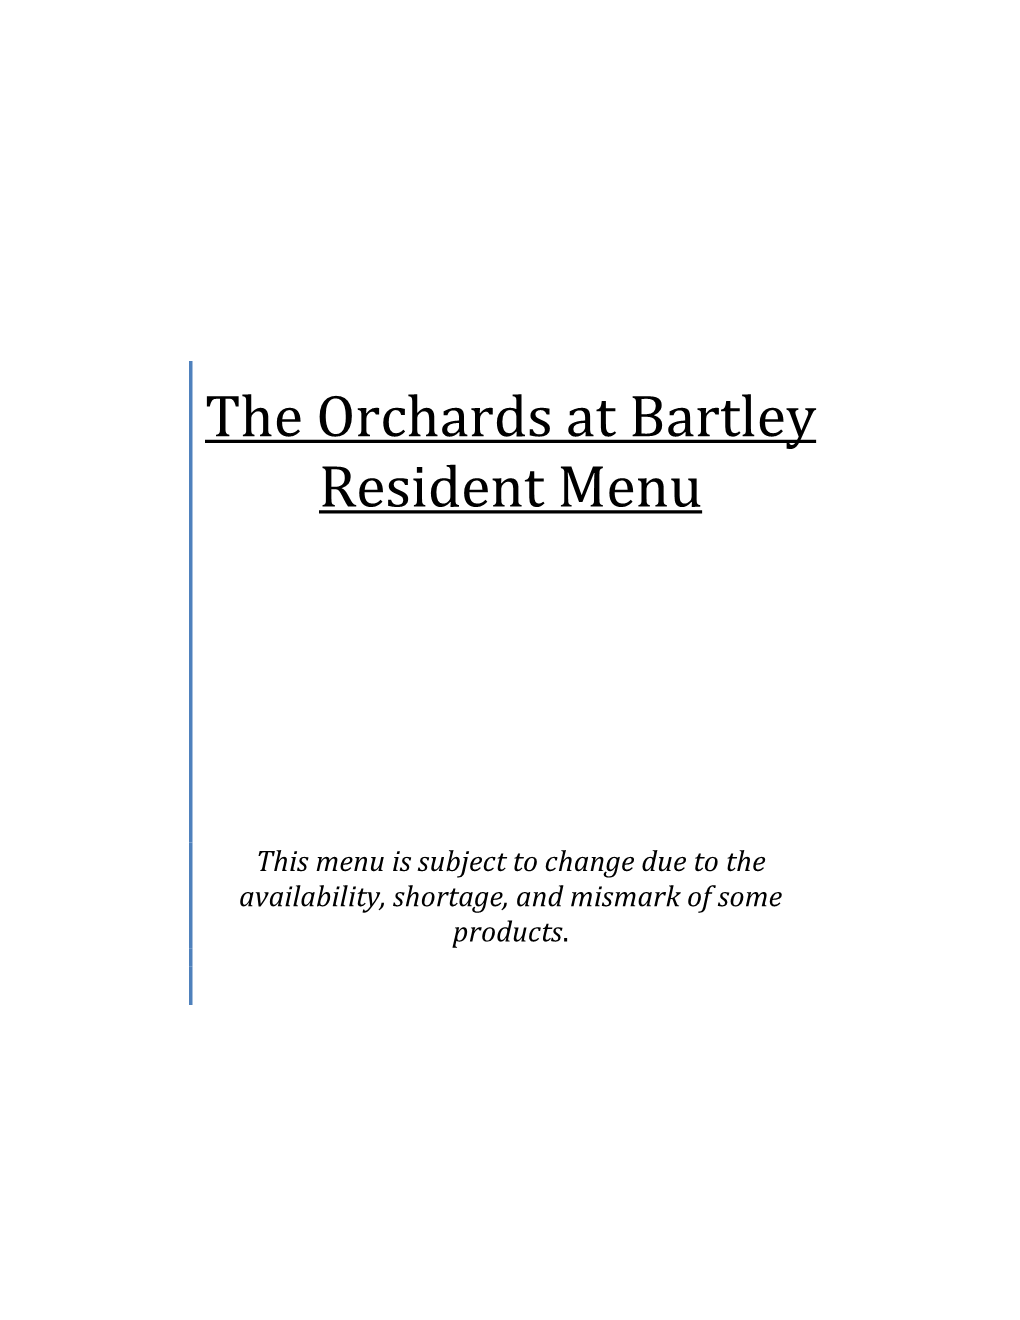 The Orchards at Bartley Resident Menu